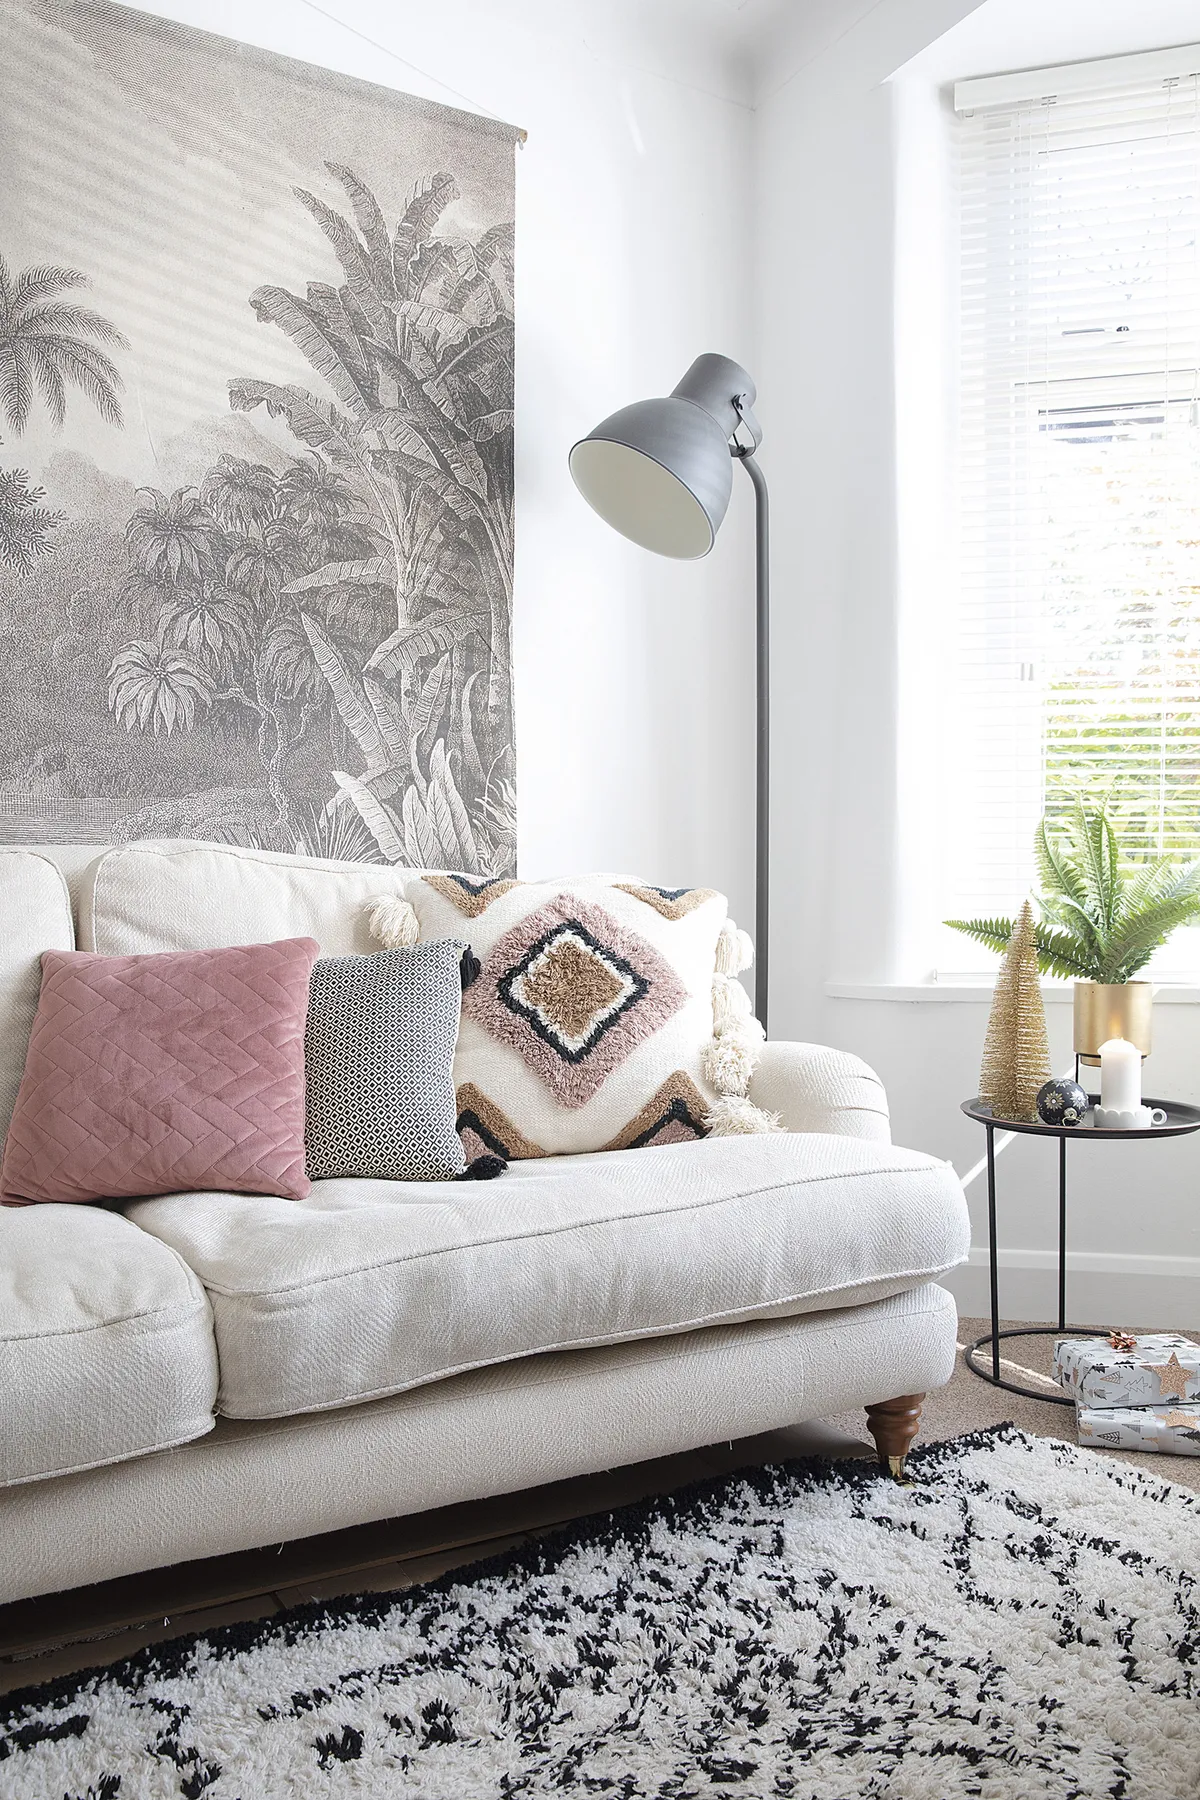 ‘The wall hanging from Love Frankie is a great alternative to wallpaper as it still creates a big pattern on the wall but can be moved around,’ Louise says. ‘I’ve added monochrome touches like the side table from Maisons du Monde and diamond pattern cushions from H&M Home’